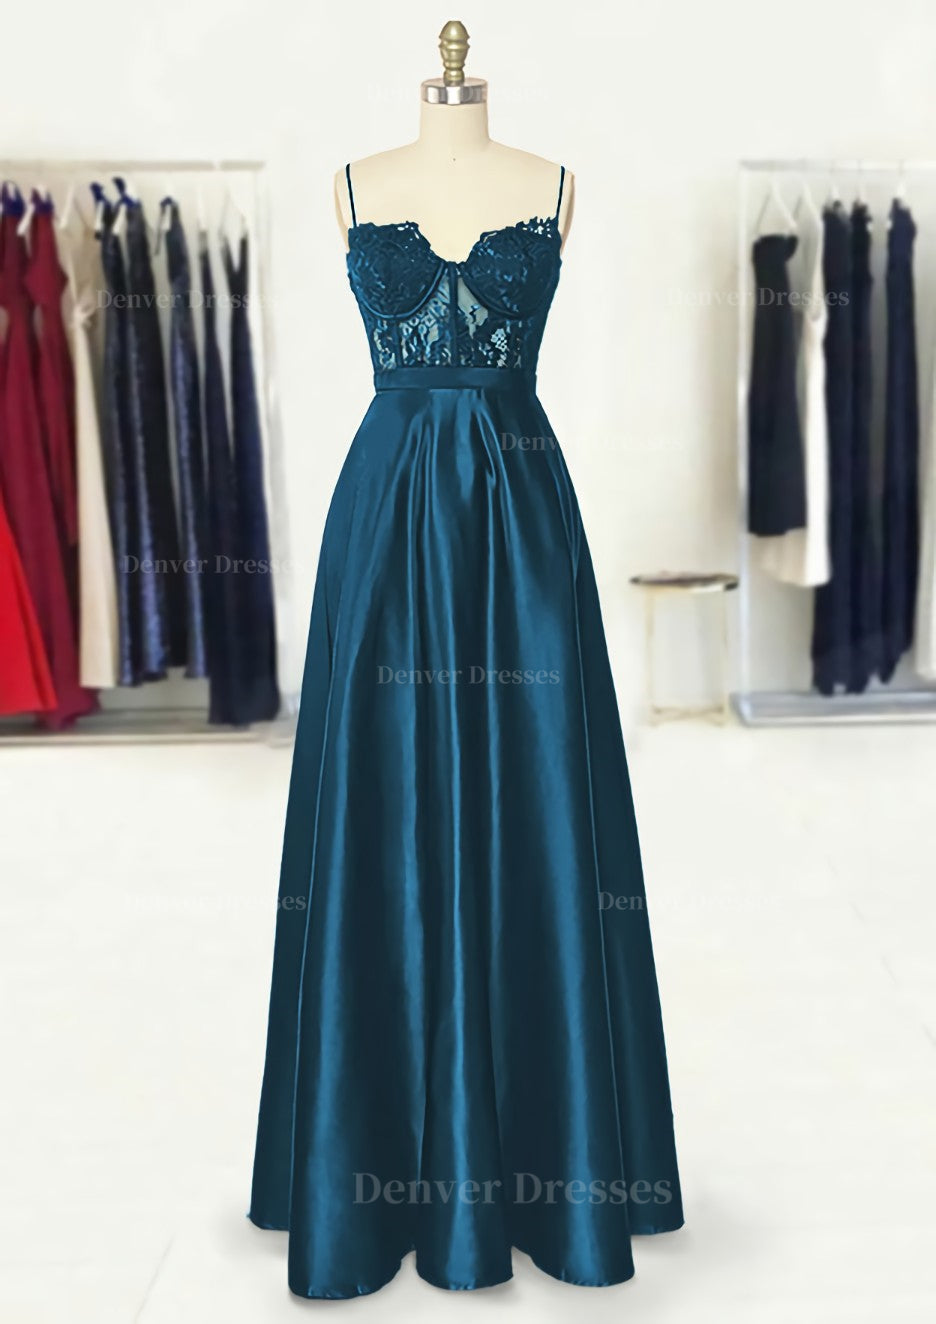 Bridesmaid Dresses Ideas, A-line Sweetheart Spaghetti Straps Long/Floor-Length Satin Prom Dress With Appliqued Pockets